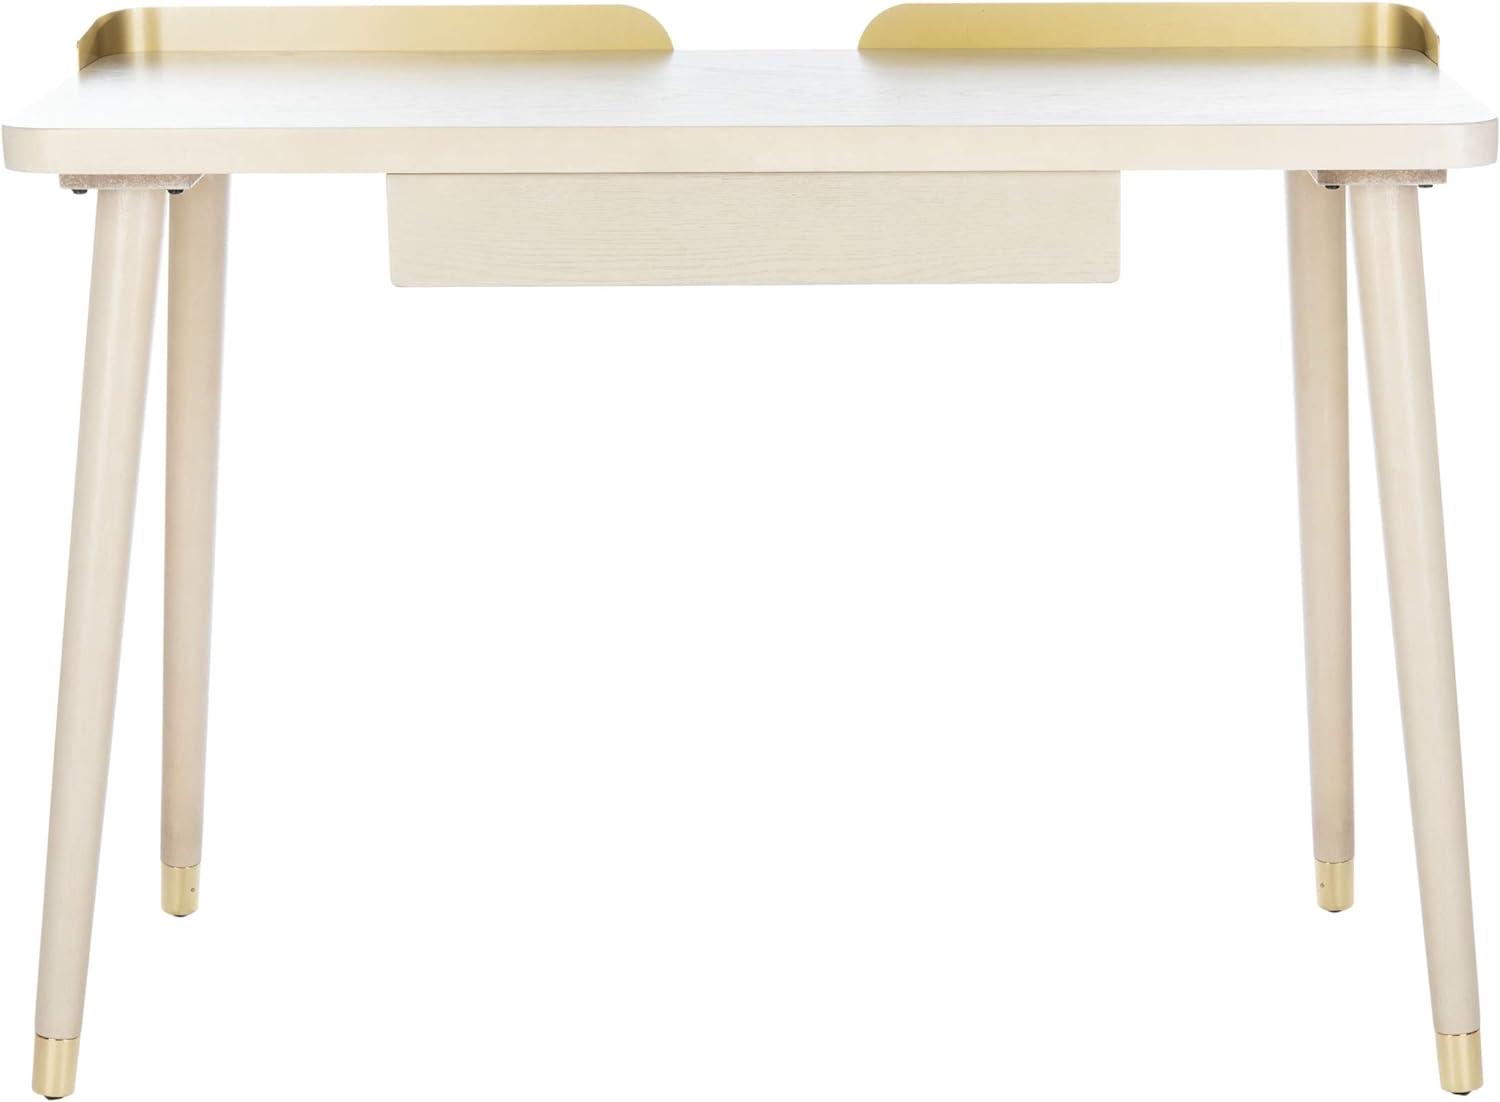 Transitional White Washed and Gold Home Office Desk with Drawer